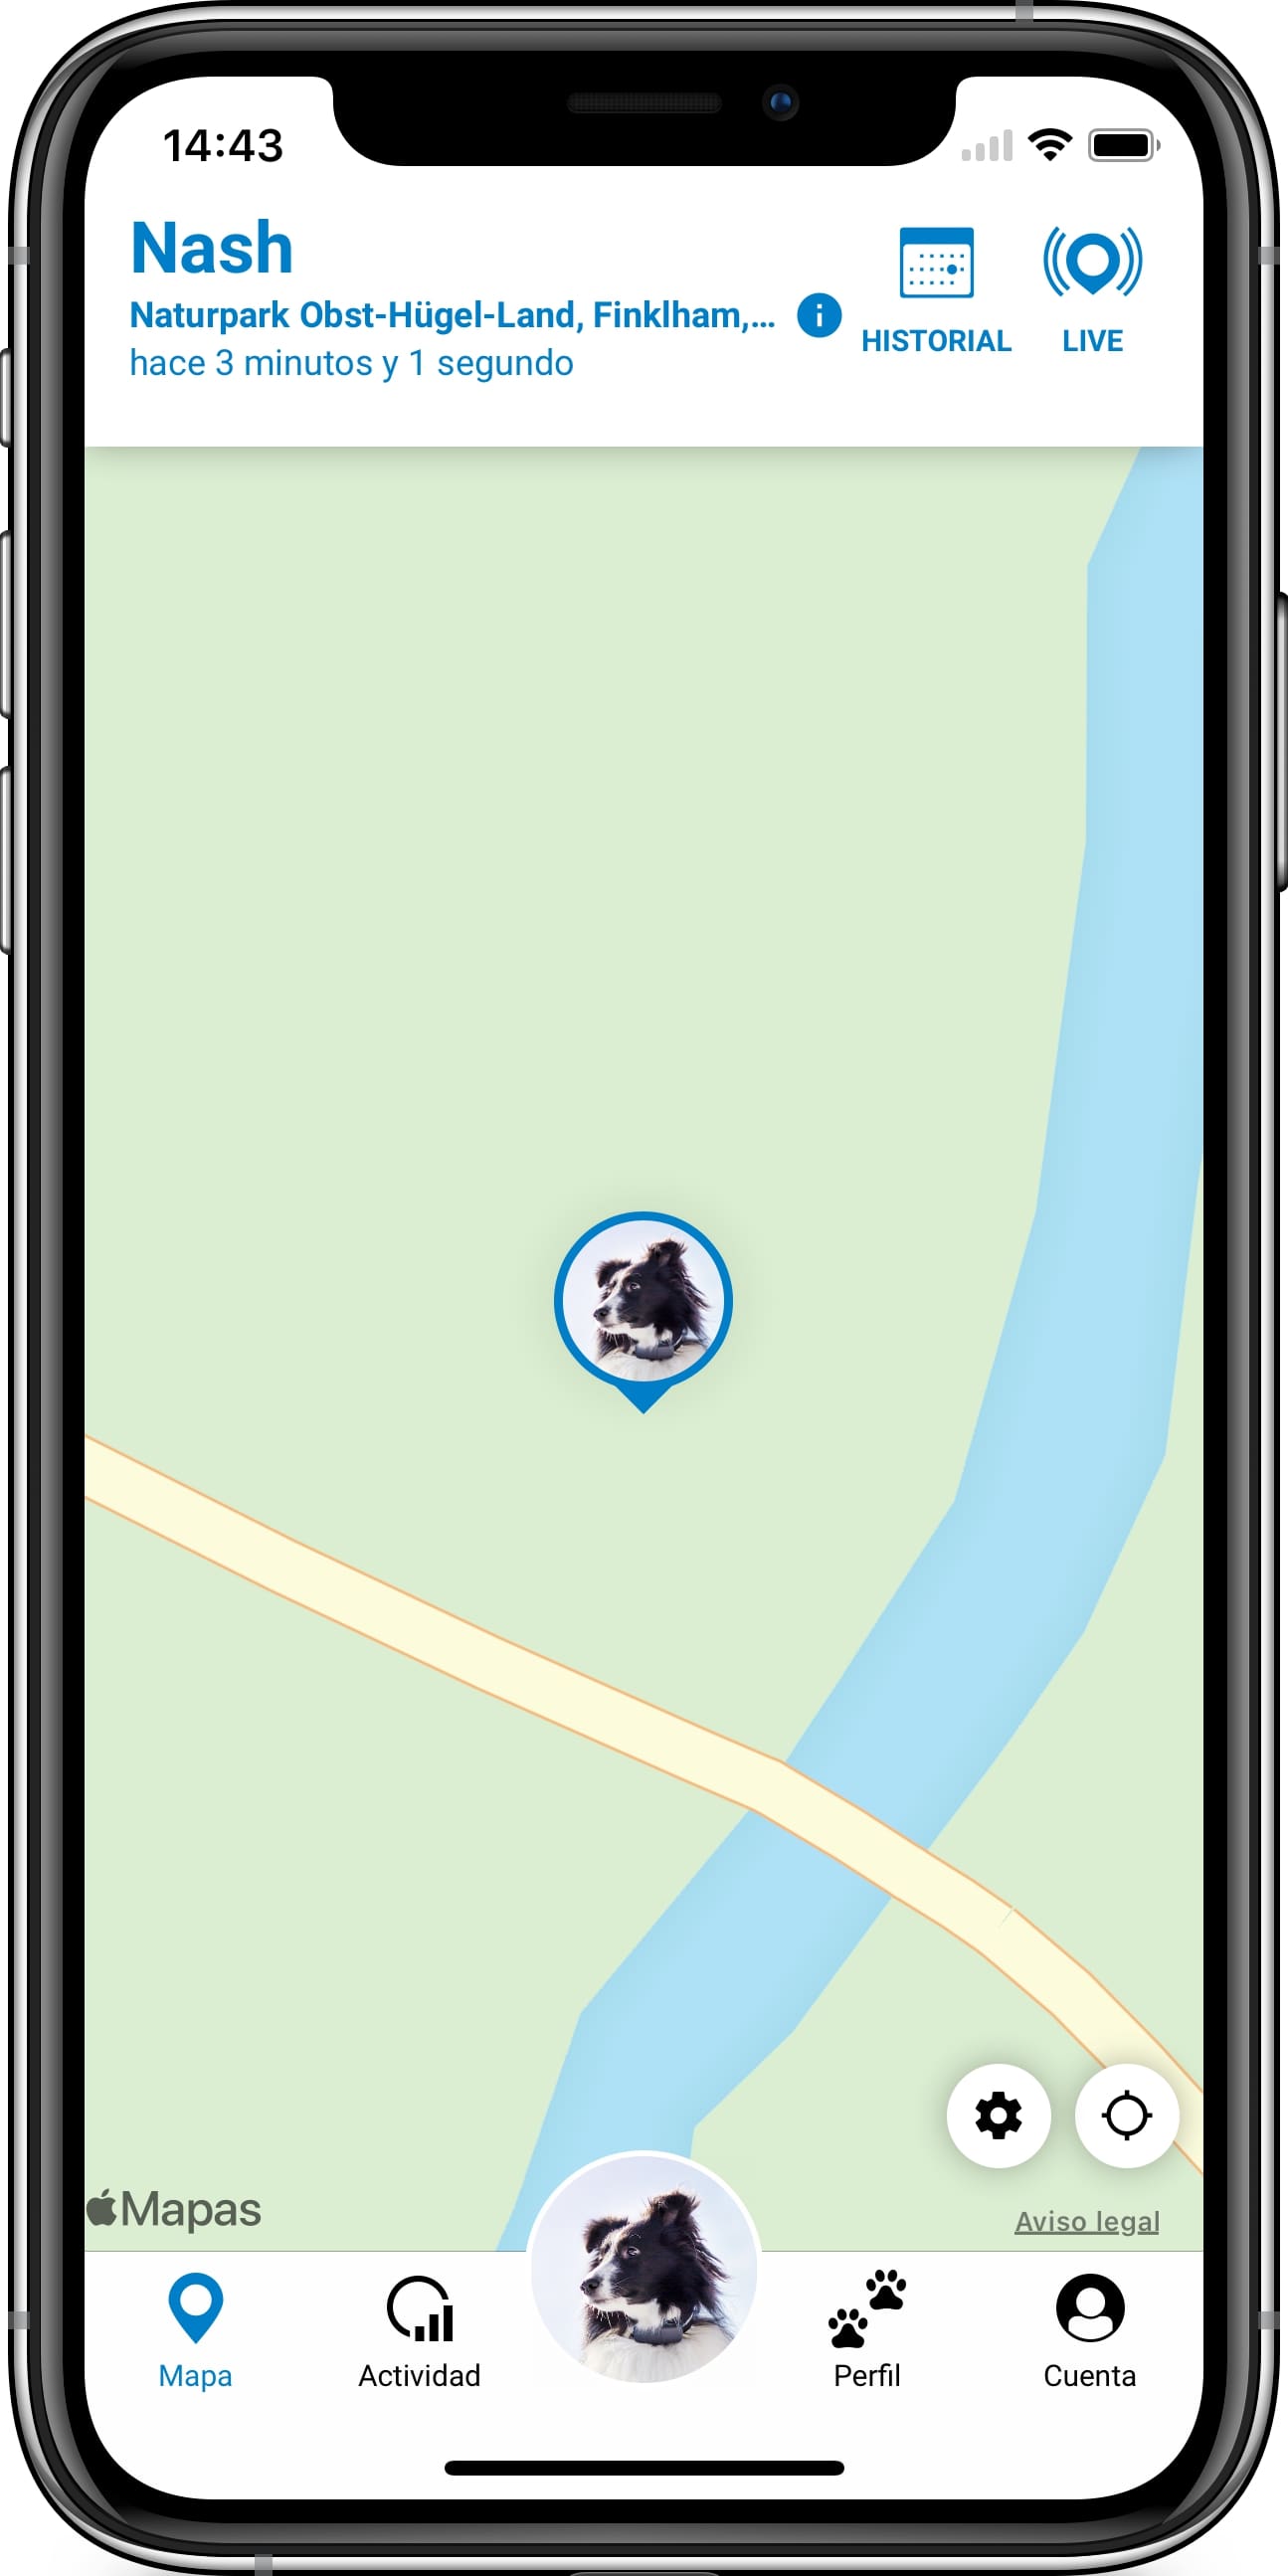 iPhone_11_Pro-Nash_-_Map_NEARBY__Screen_framed__4_.jpg